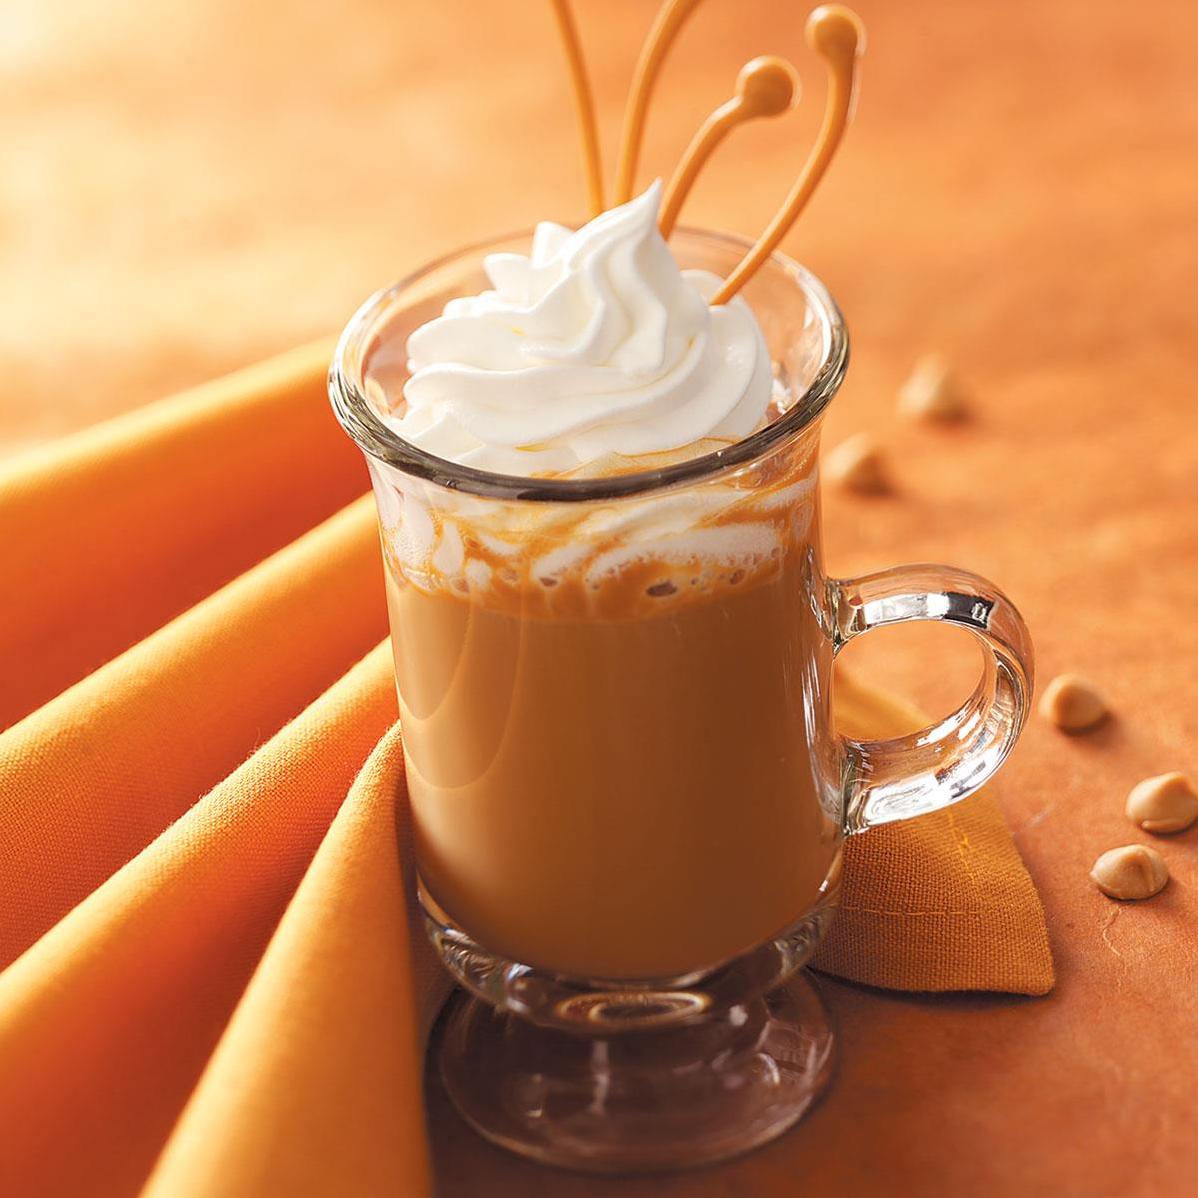  Indulge in this sweet and creamy coffee recipe.